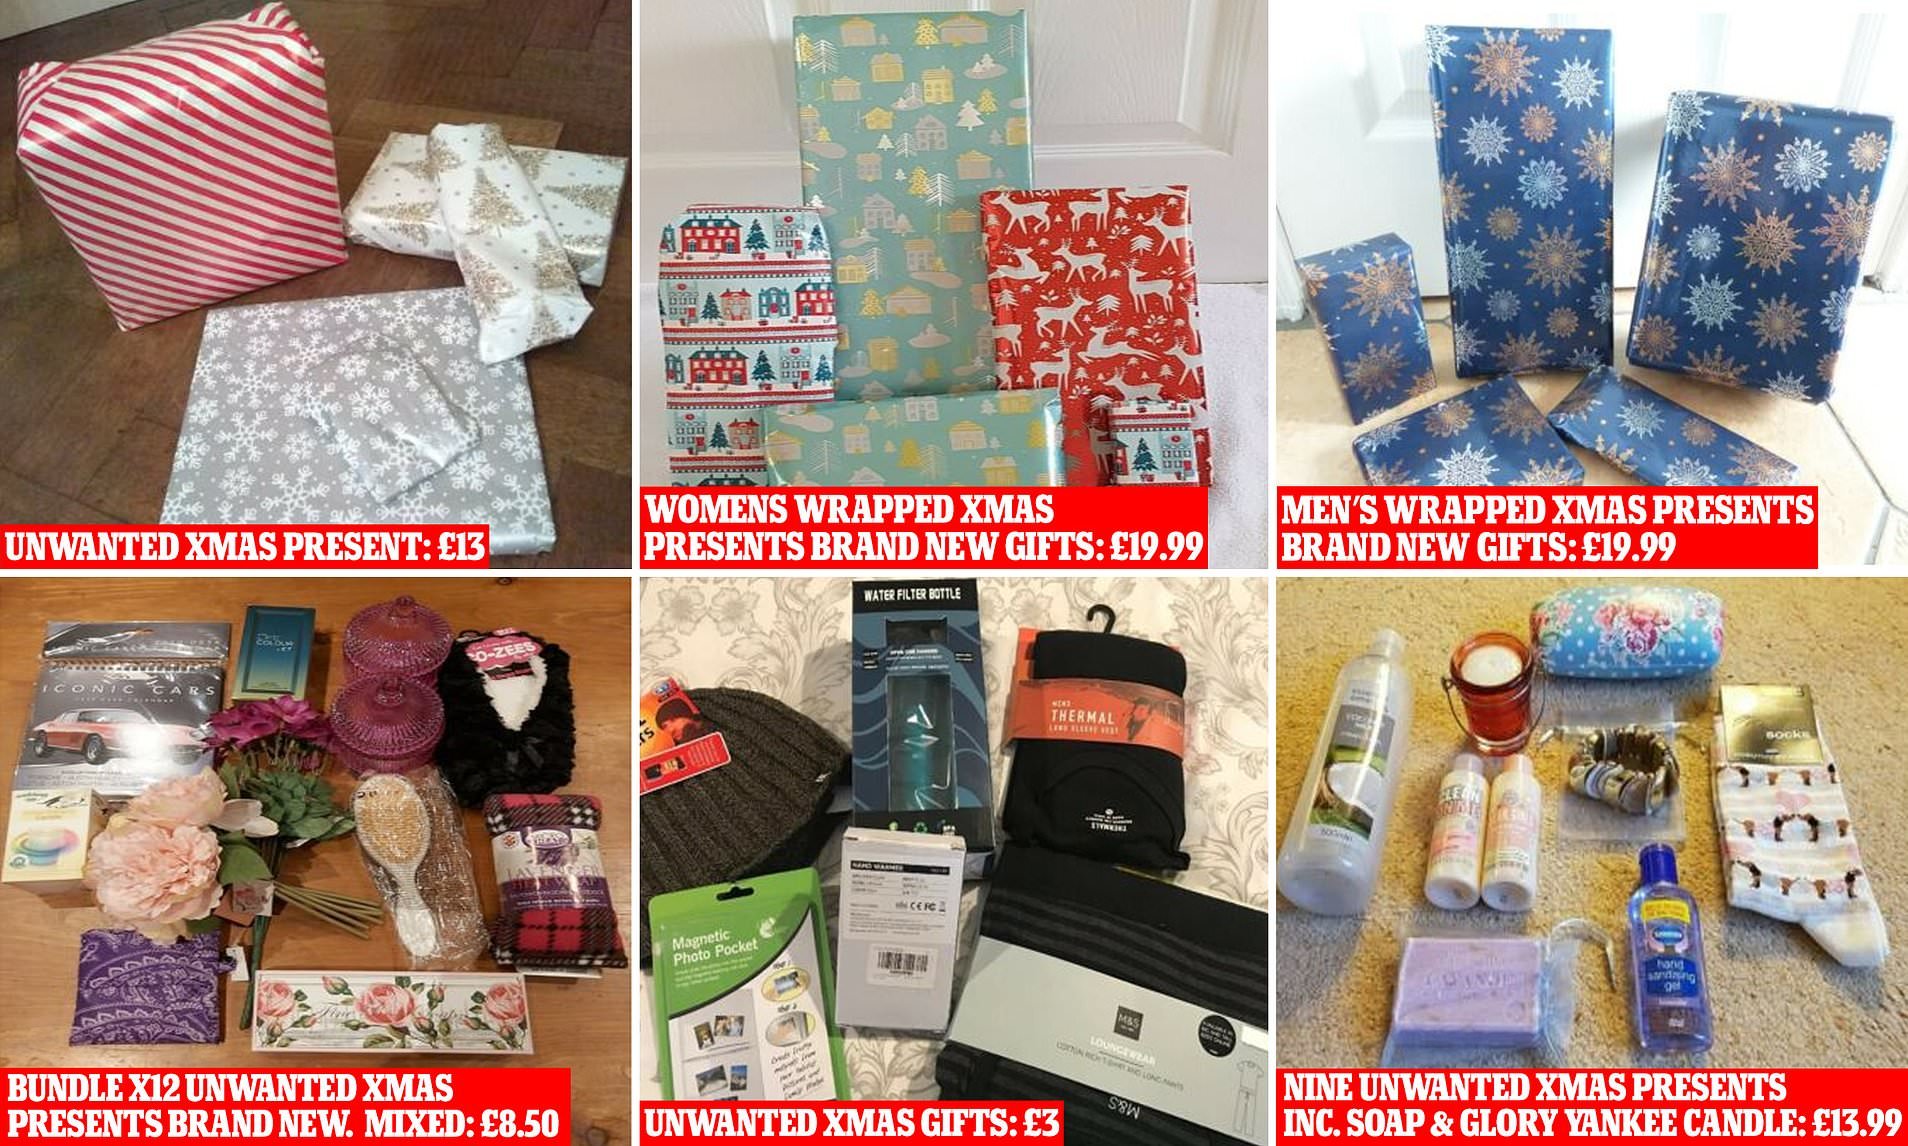 People flog unwanted Christmas gifts on eBay for cash | Daily Mail Online